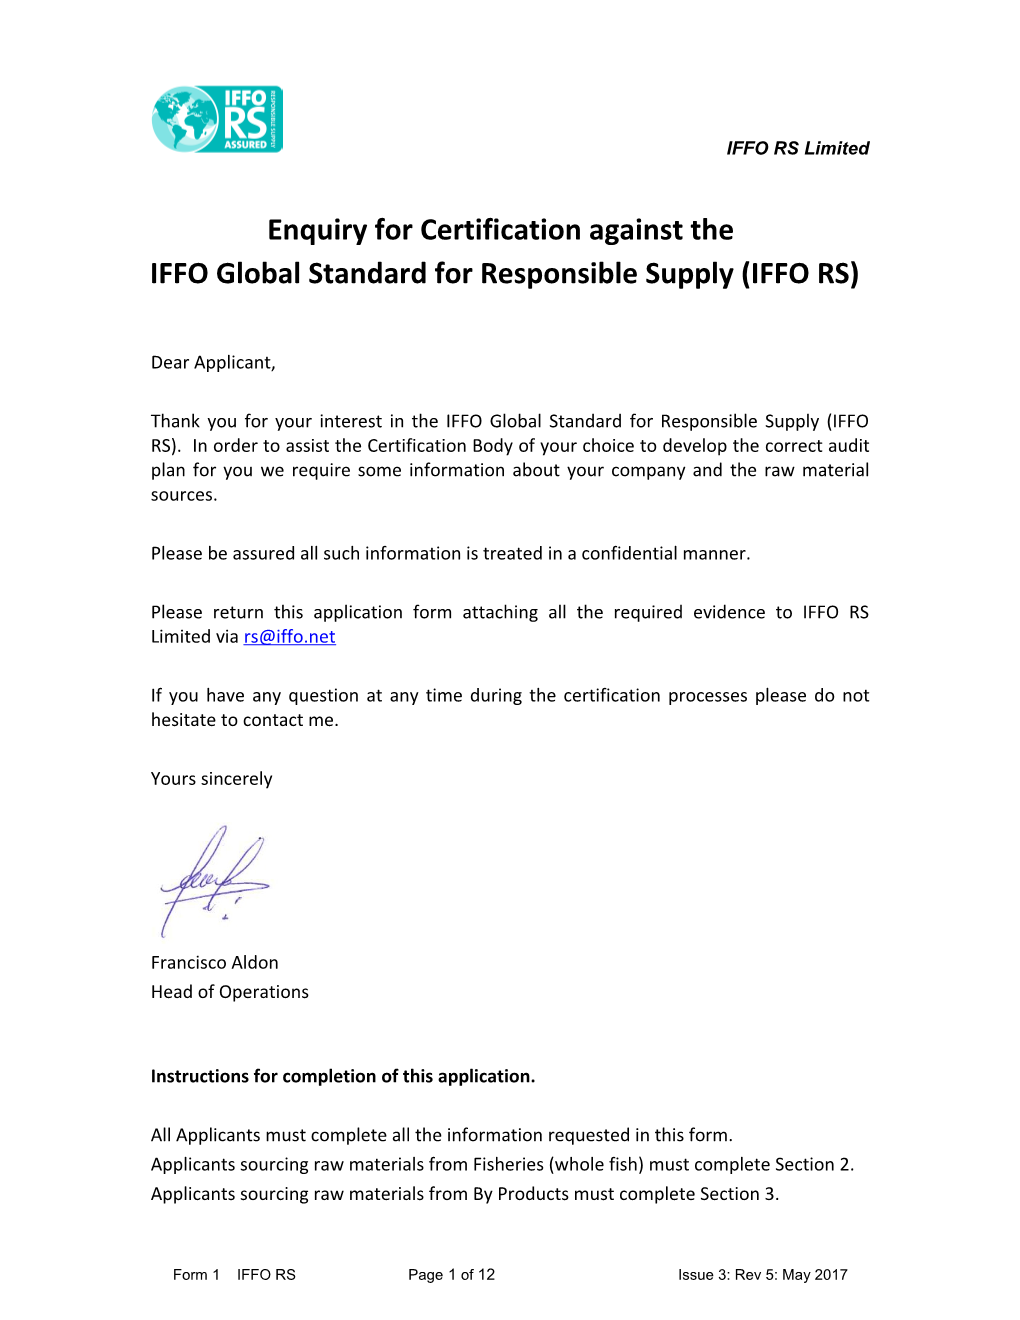 IFFO Global Standard for Responsible Supply (IFFO RS)